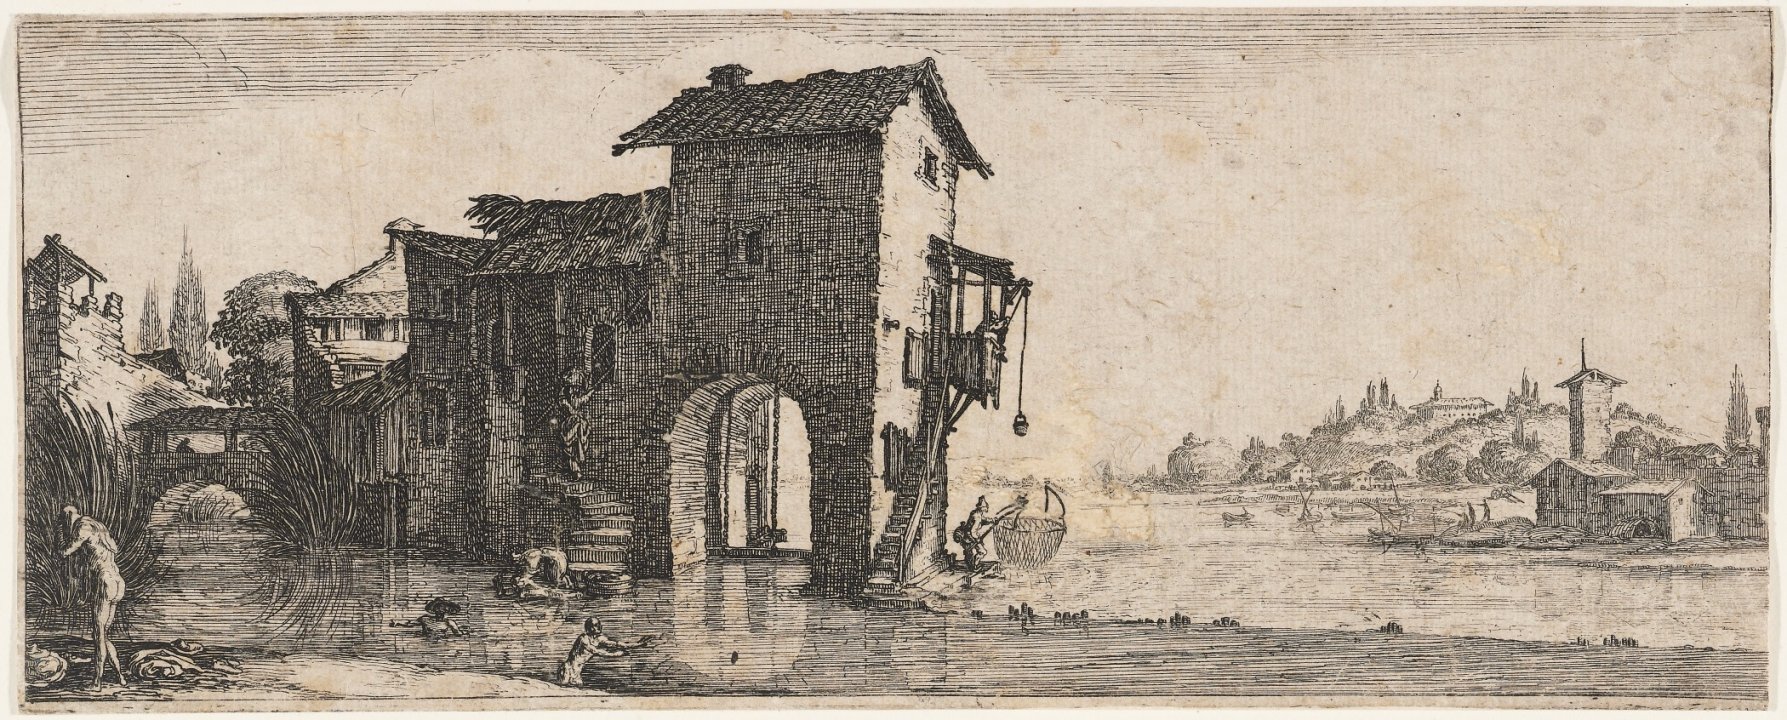 The Mill on the Water from the series Four Landscapes